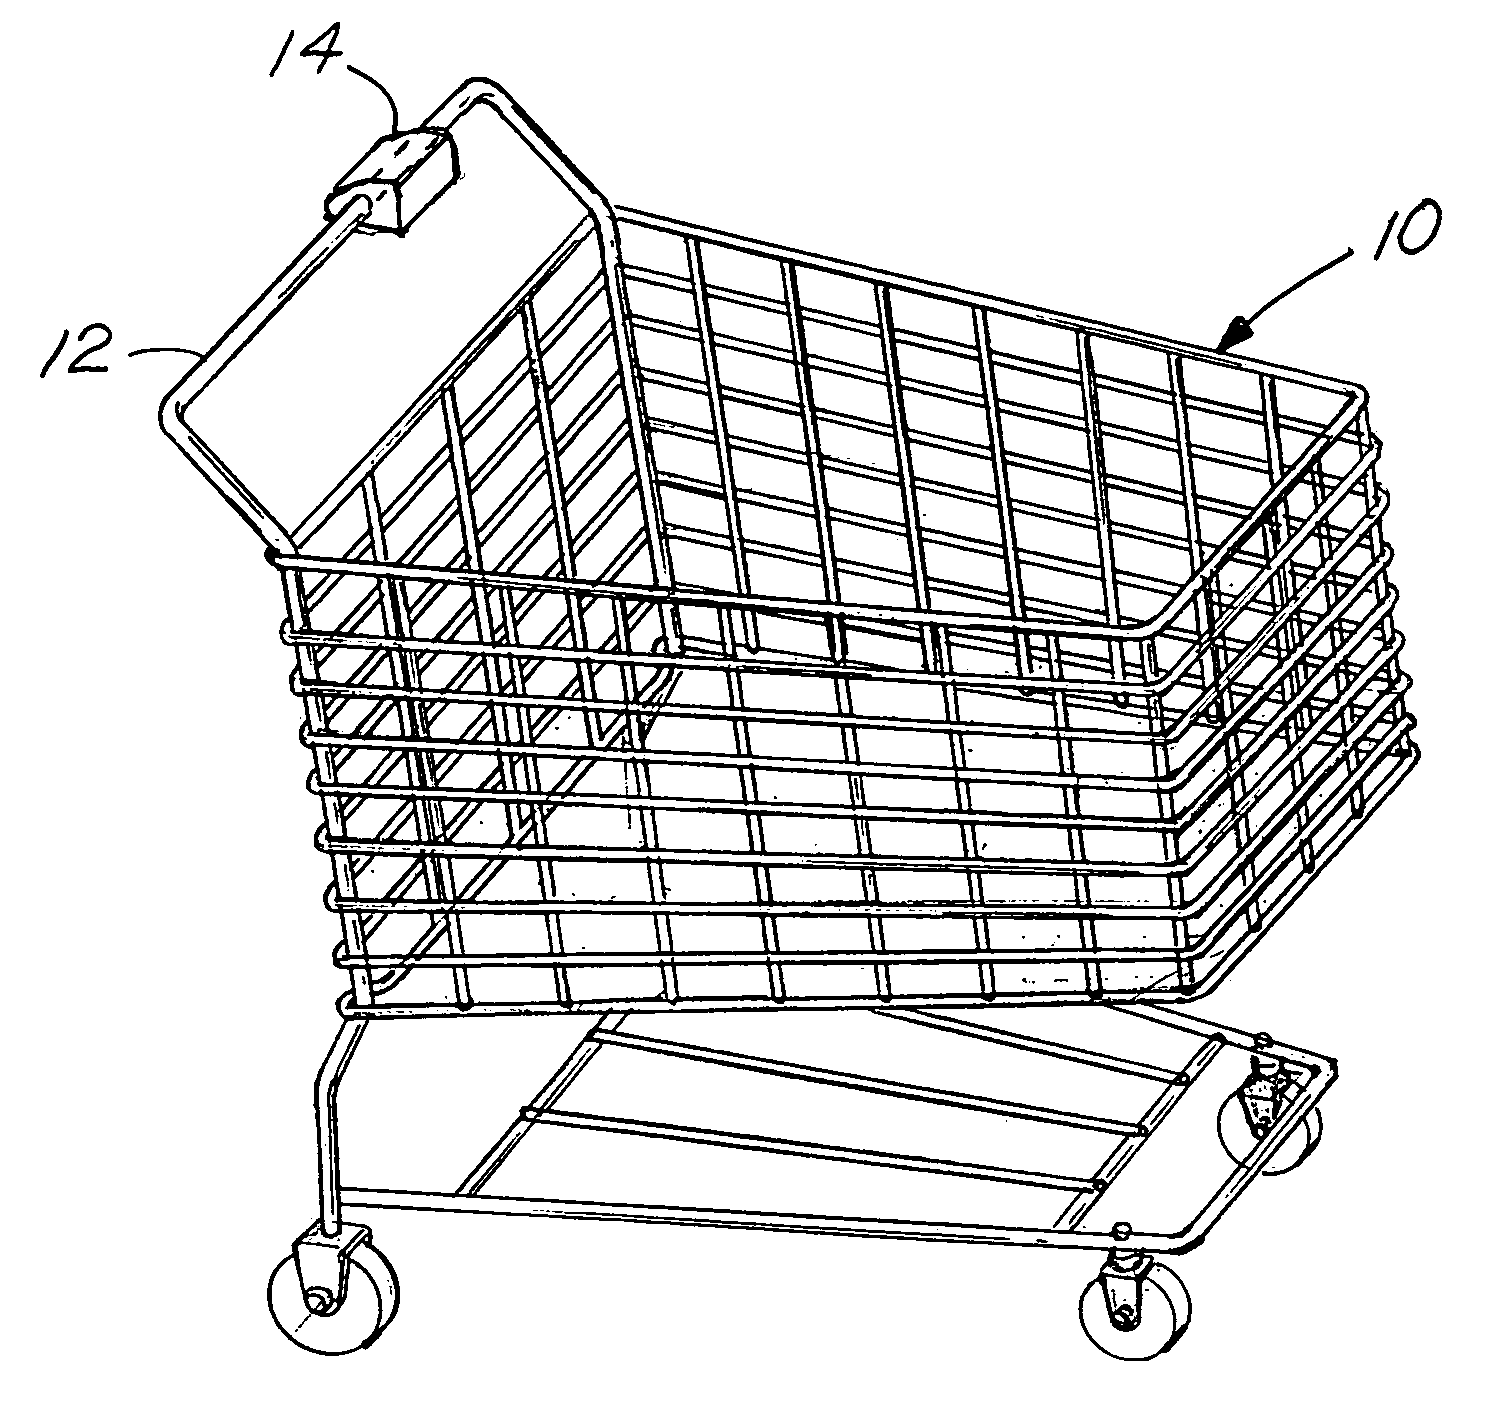 Sanitizing apparatus for shopping cart handles and other handles